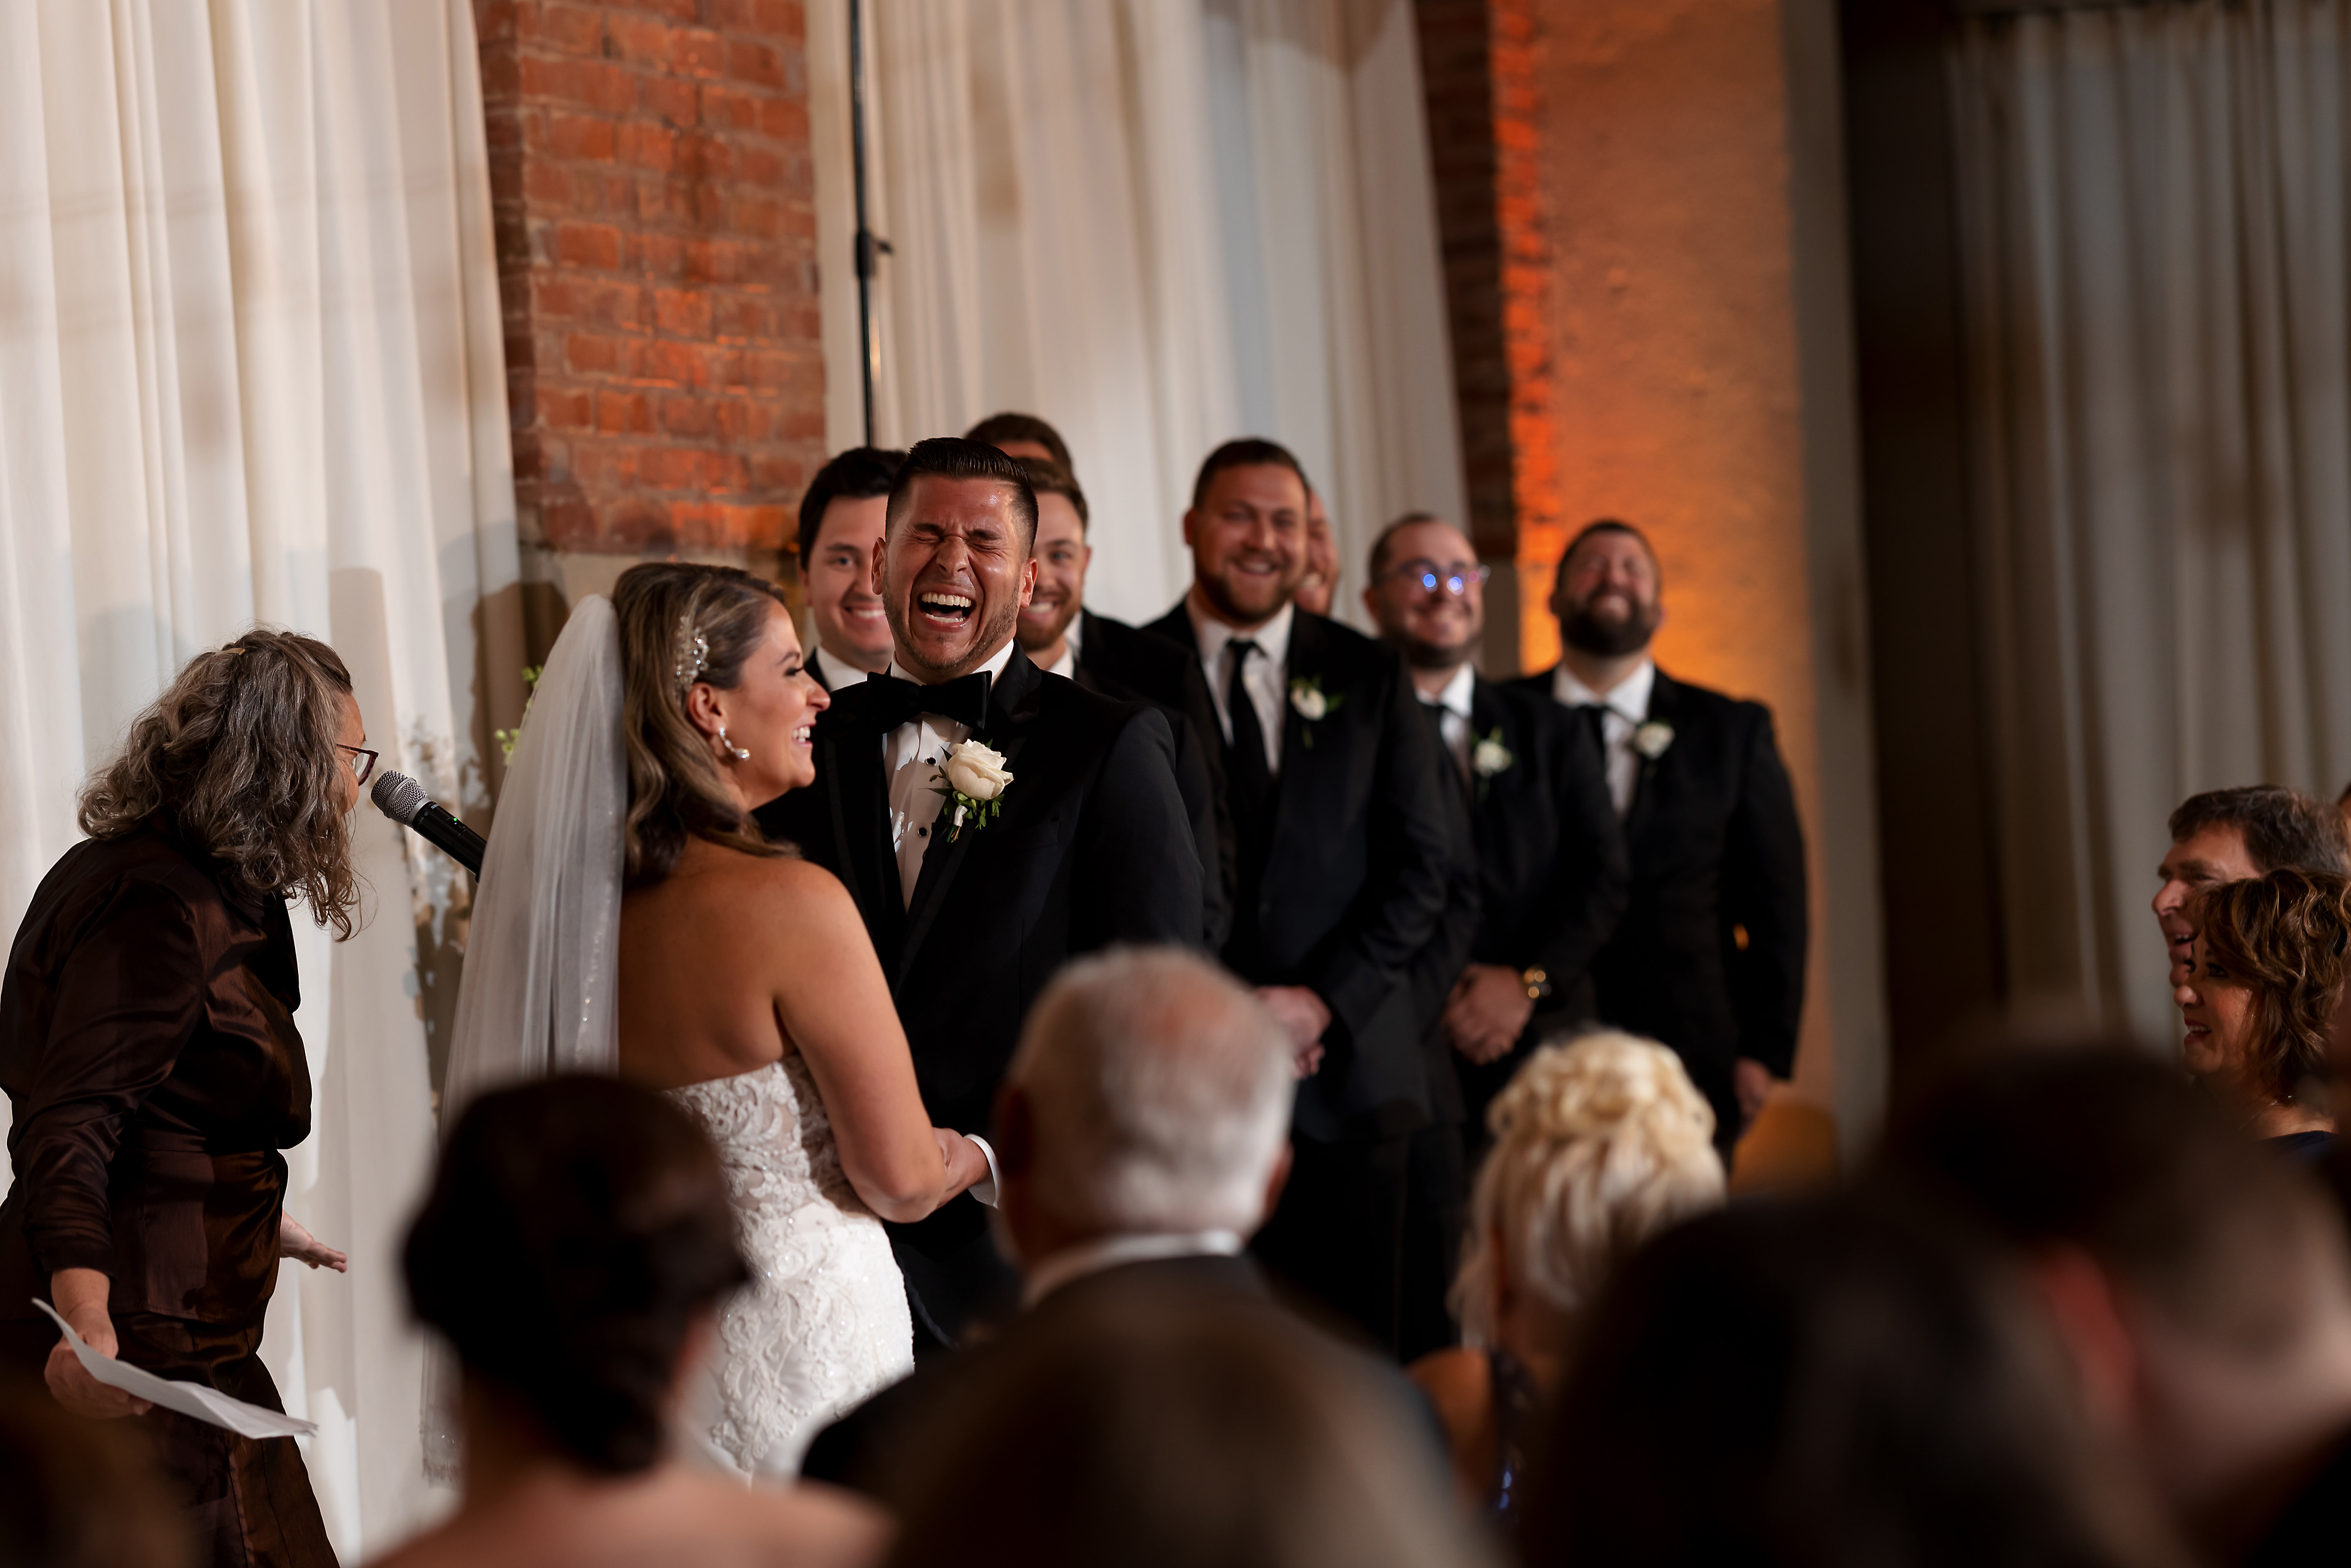 Groom laughs during wedding ceremony at Artifact Events in Chicago's Ravenswood neighborhood.